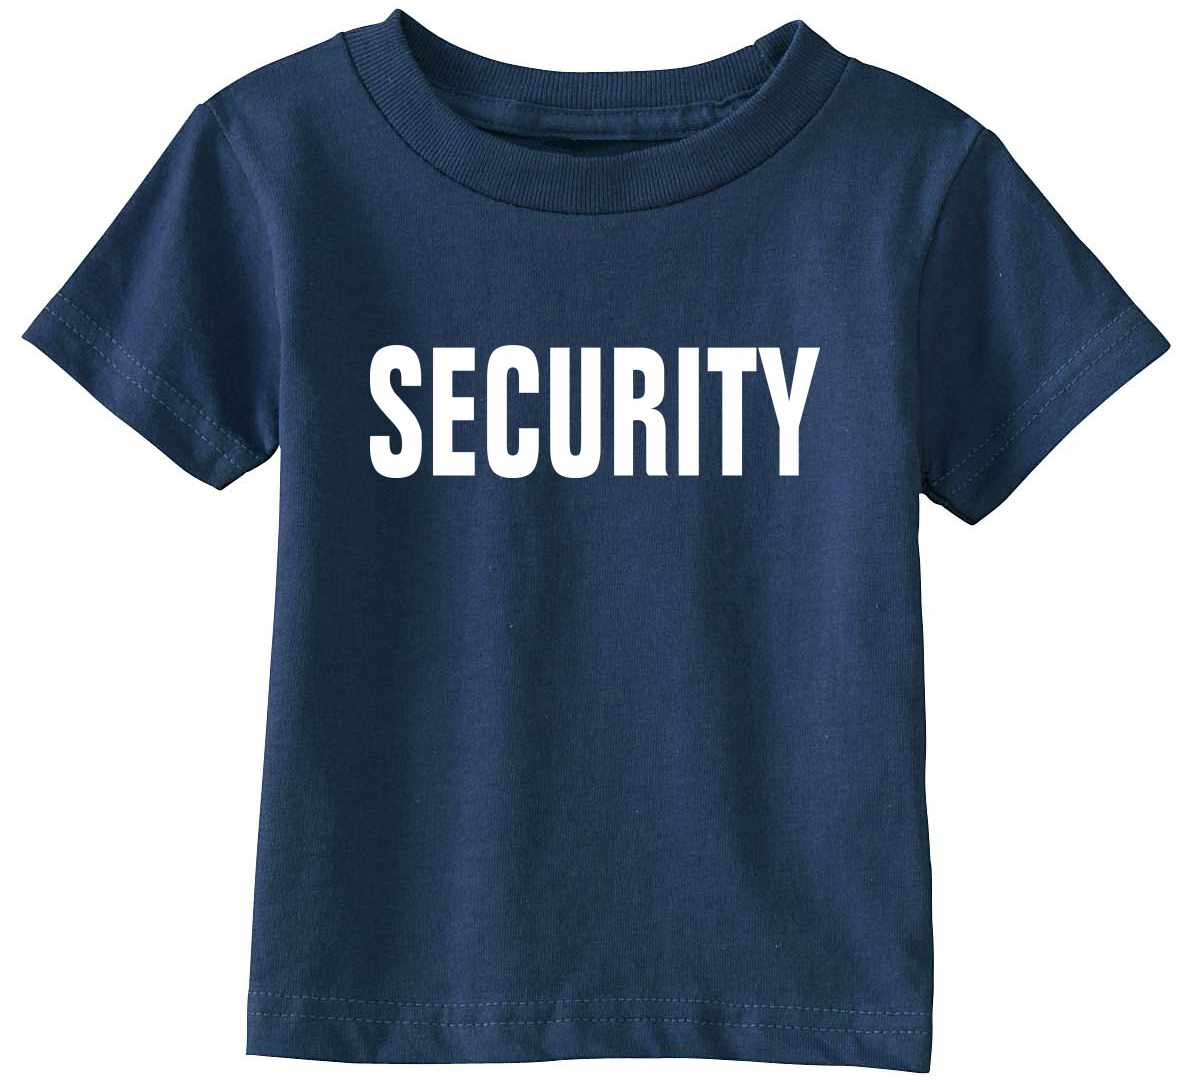 SECURITY on Infant-Toddler T-Shirt (#58-7)